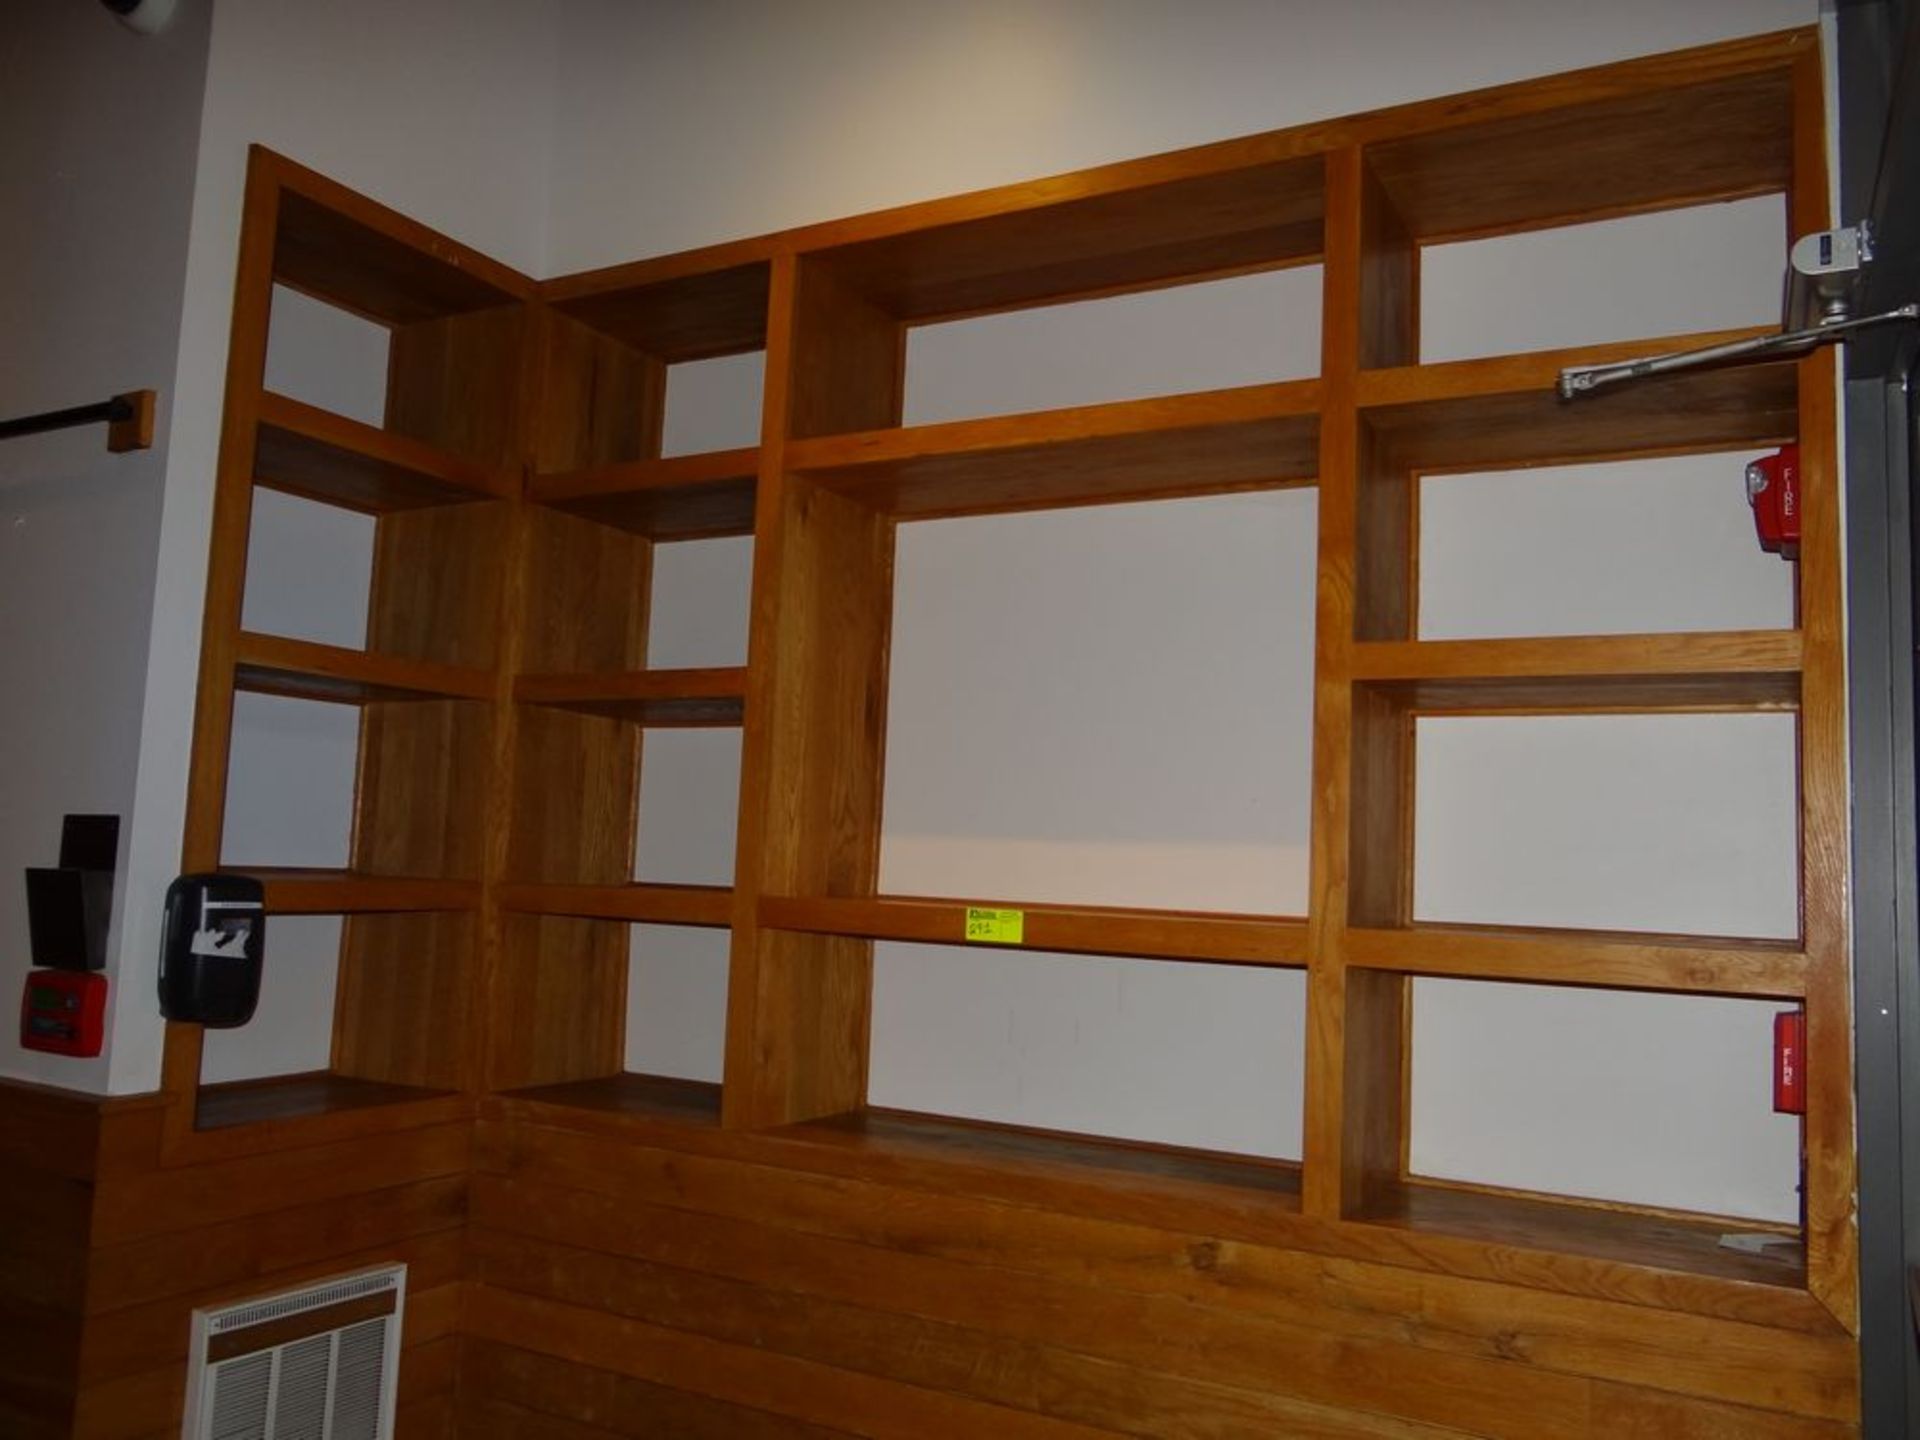 (1) 90" Sliding Ladder with Rail and All Storage Cabinets Above